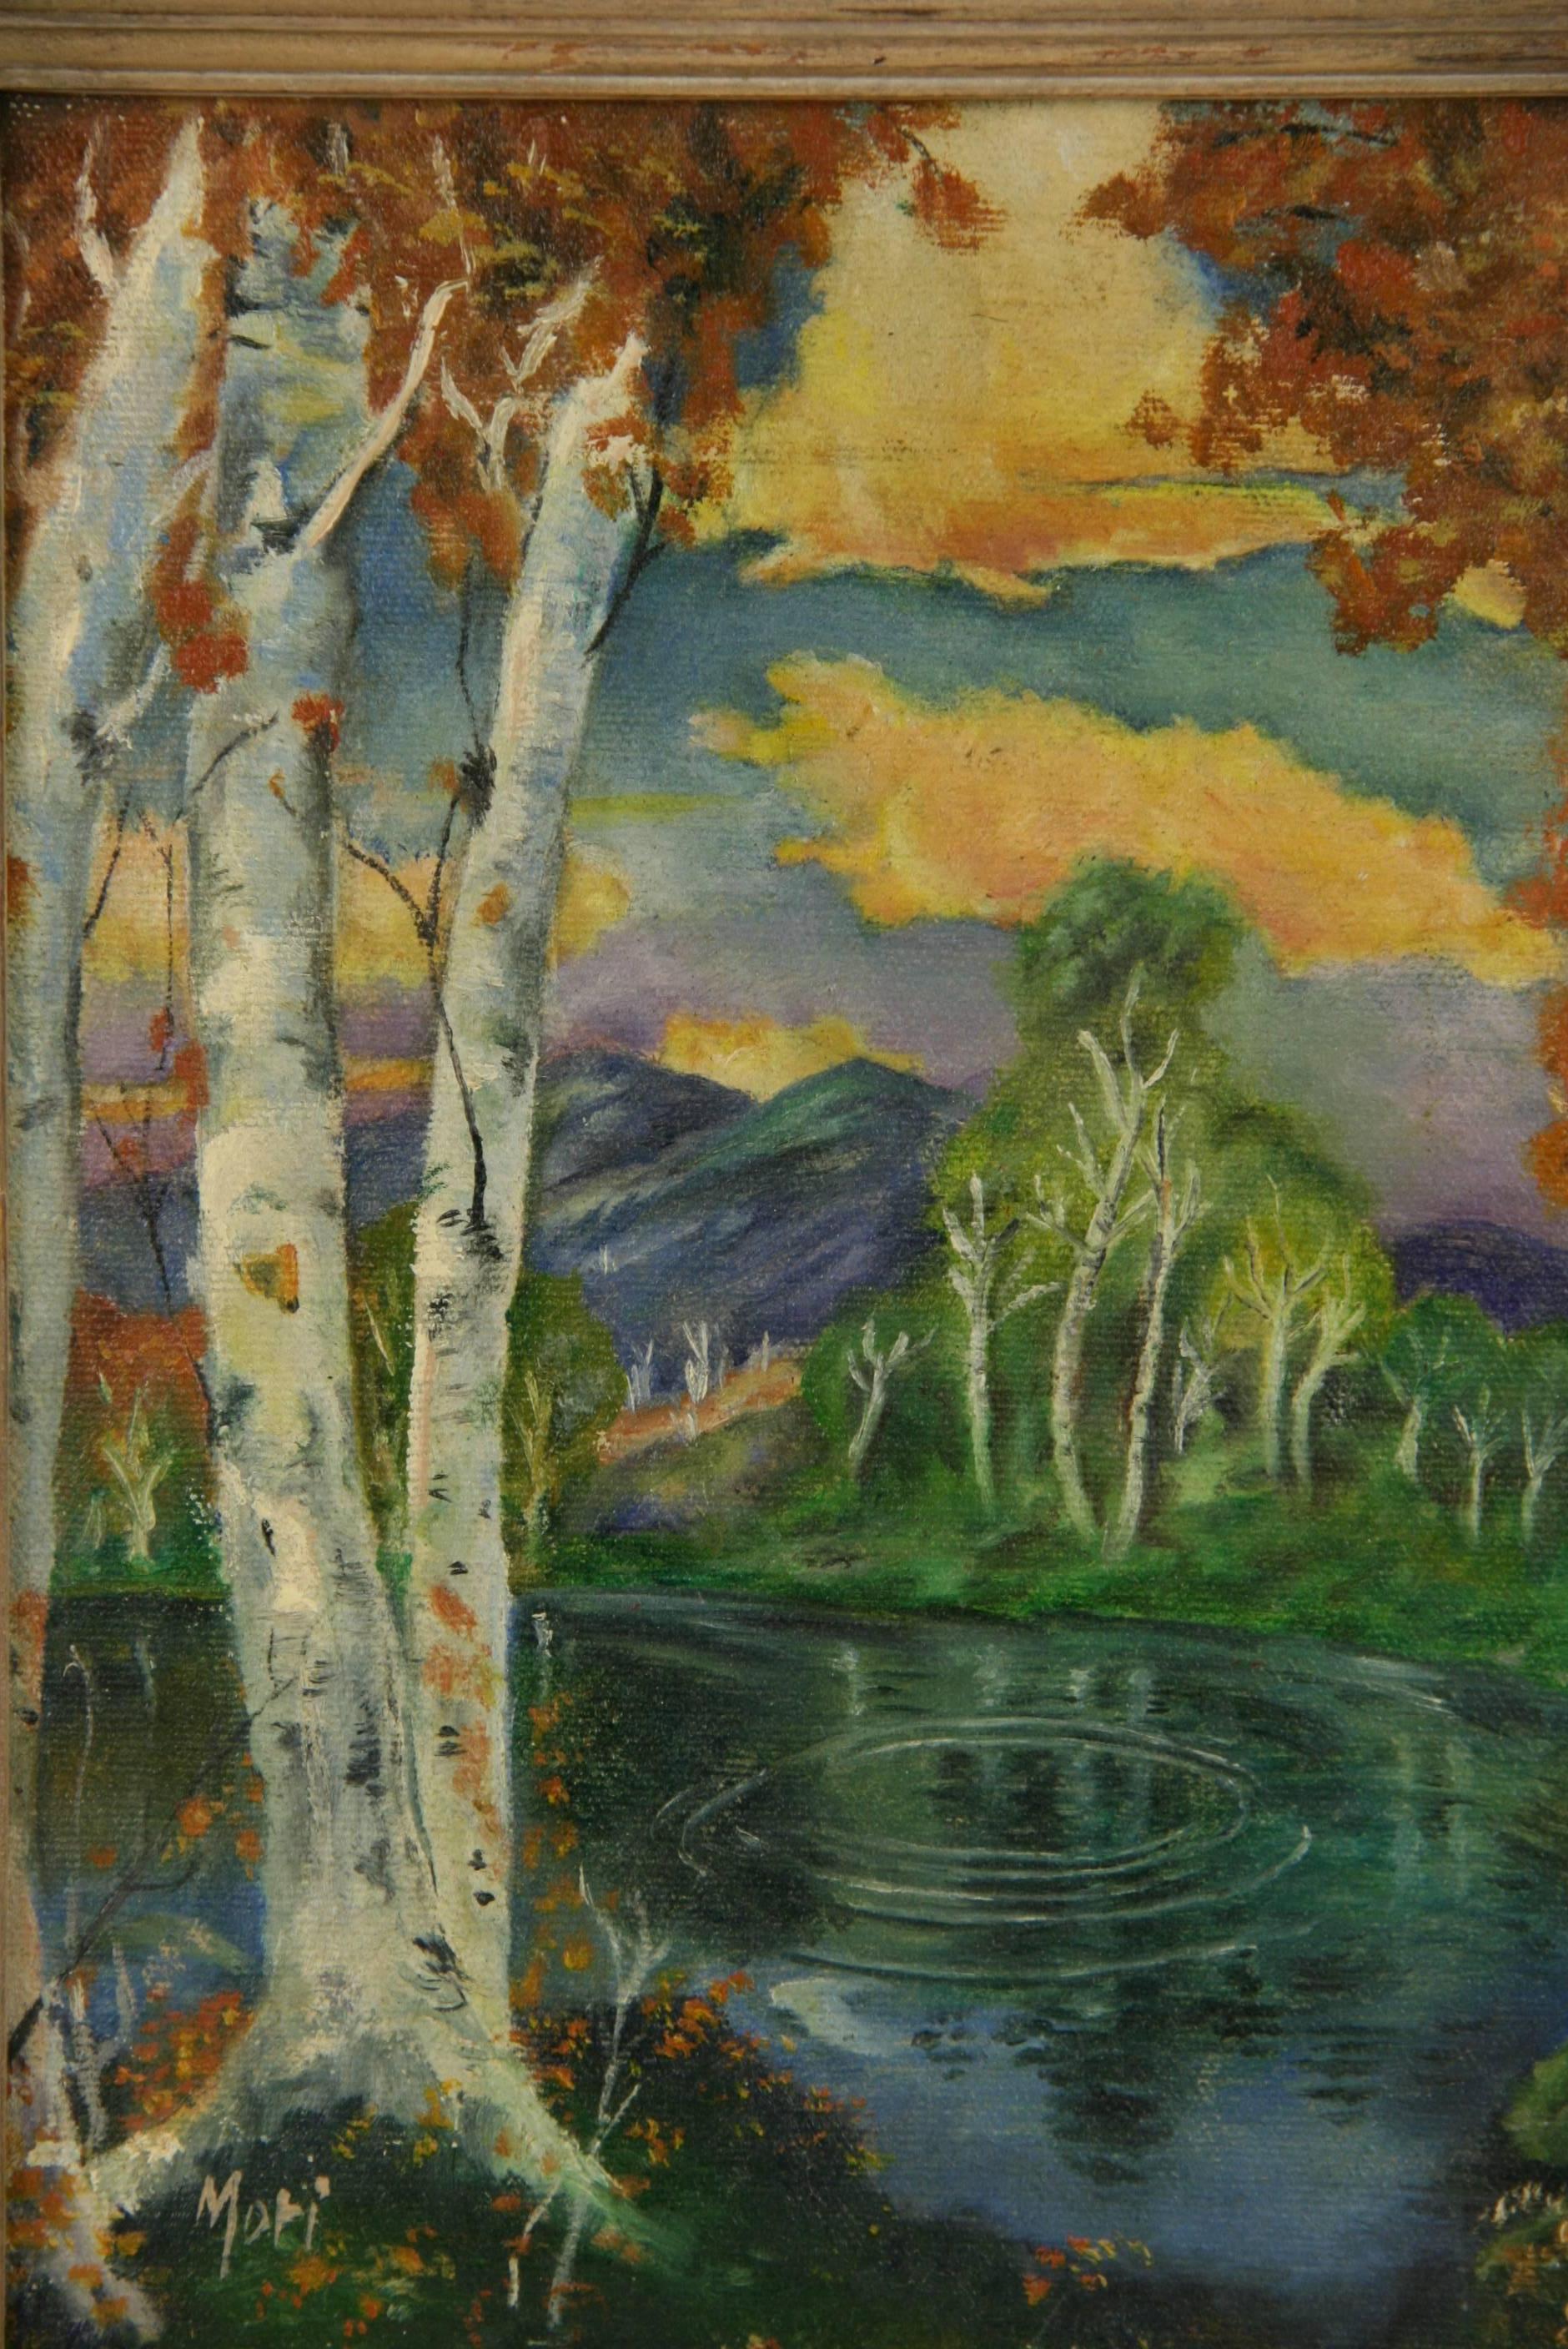 Mori Abstract Painting - Antique American Impressionist Birch Tree Landscape Framed 1940